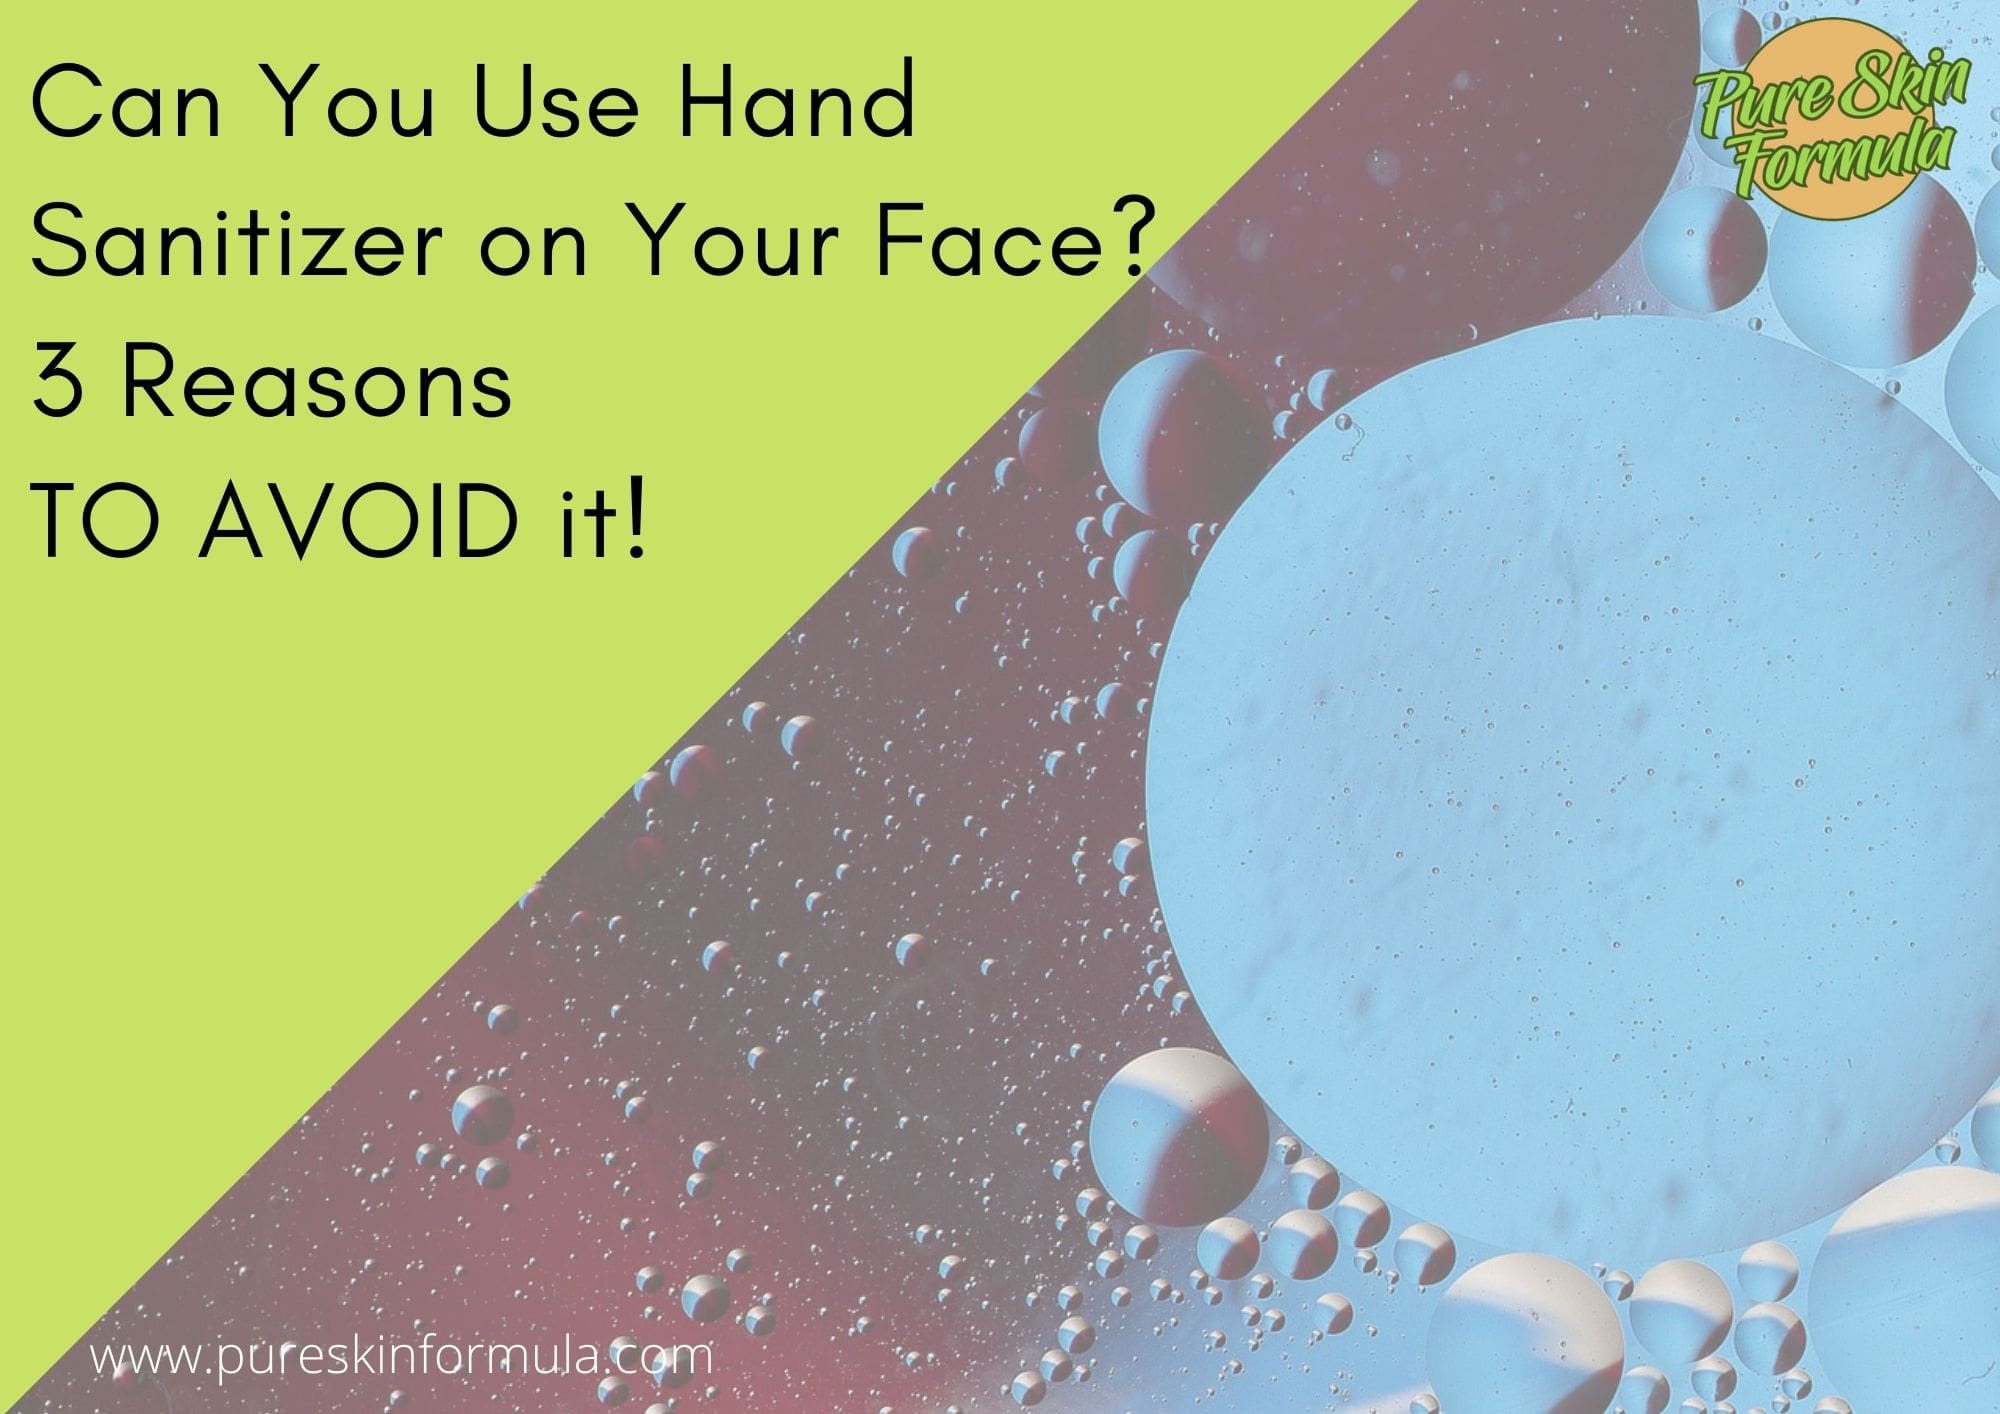 can you use hand sanitizer on your face